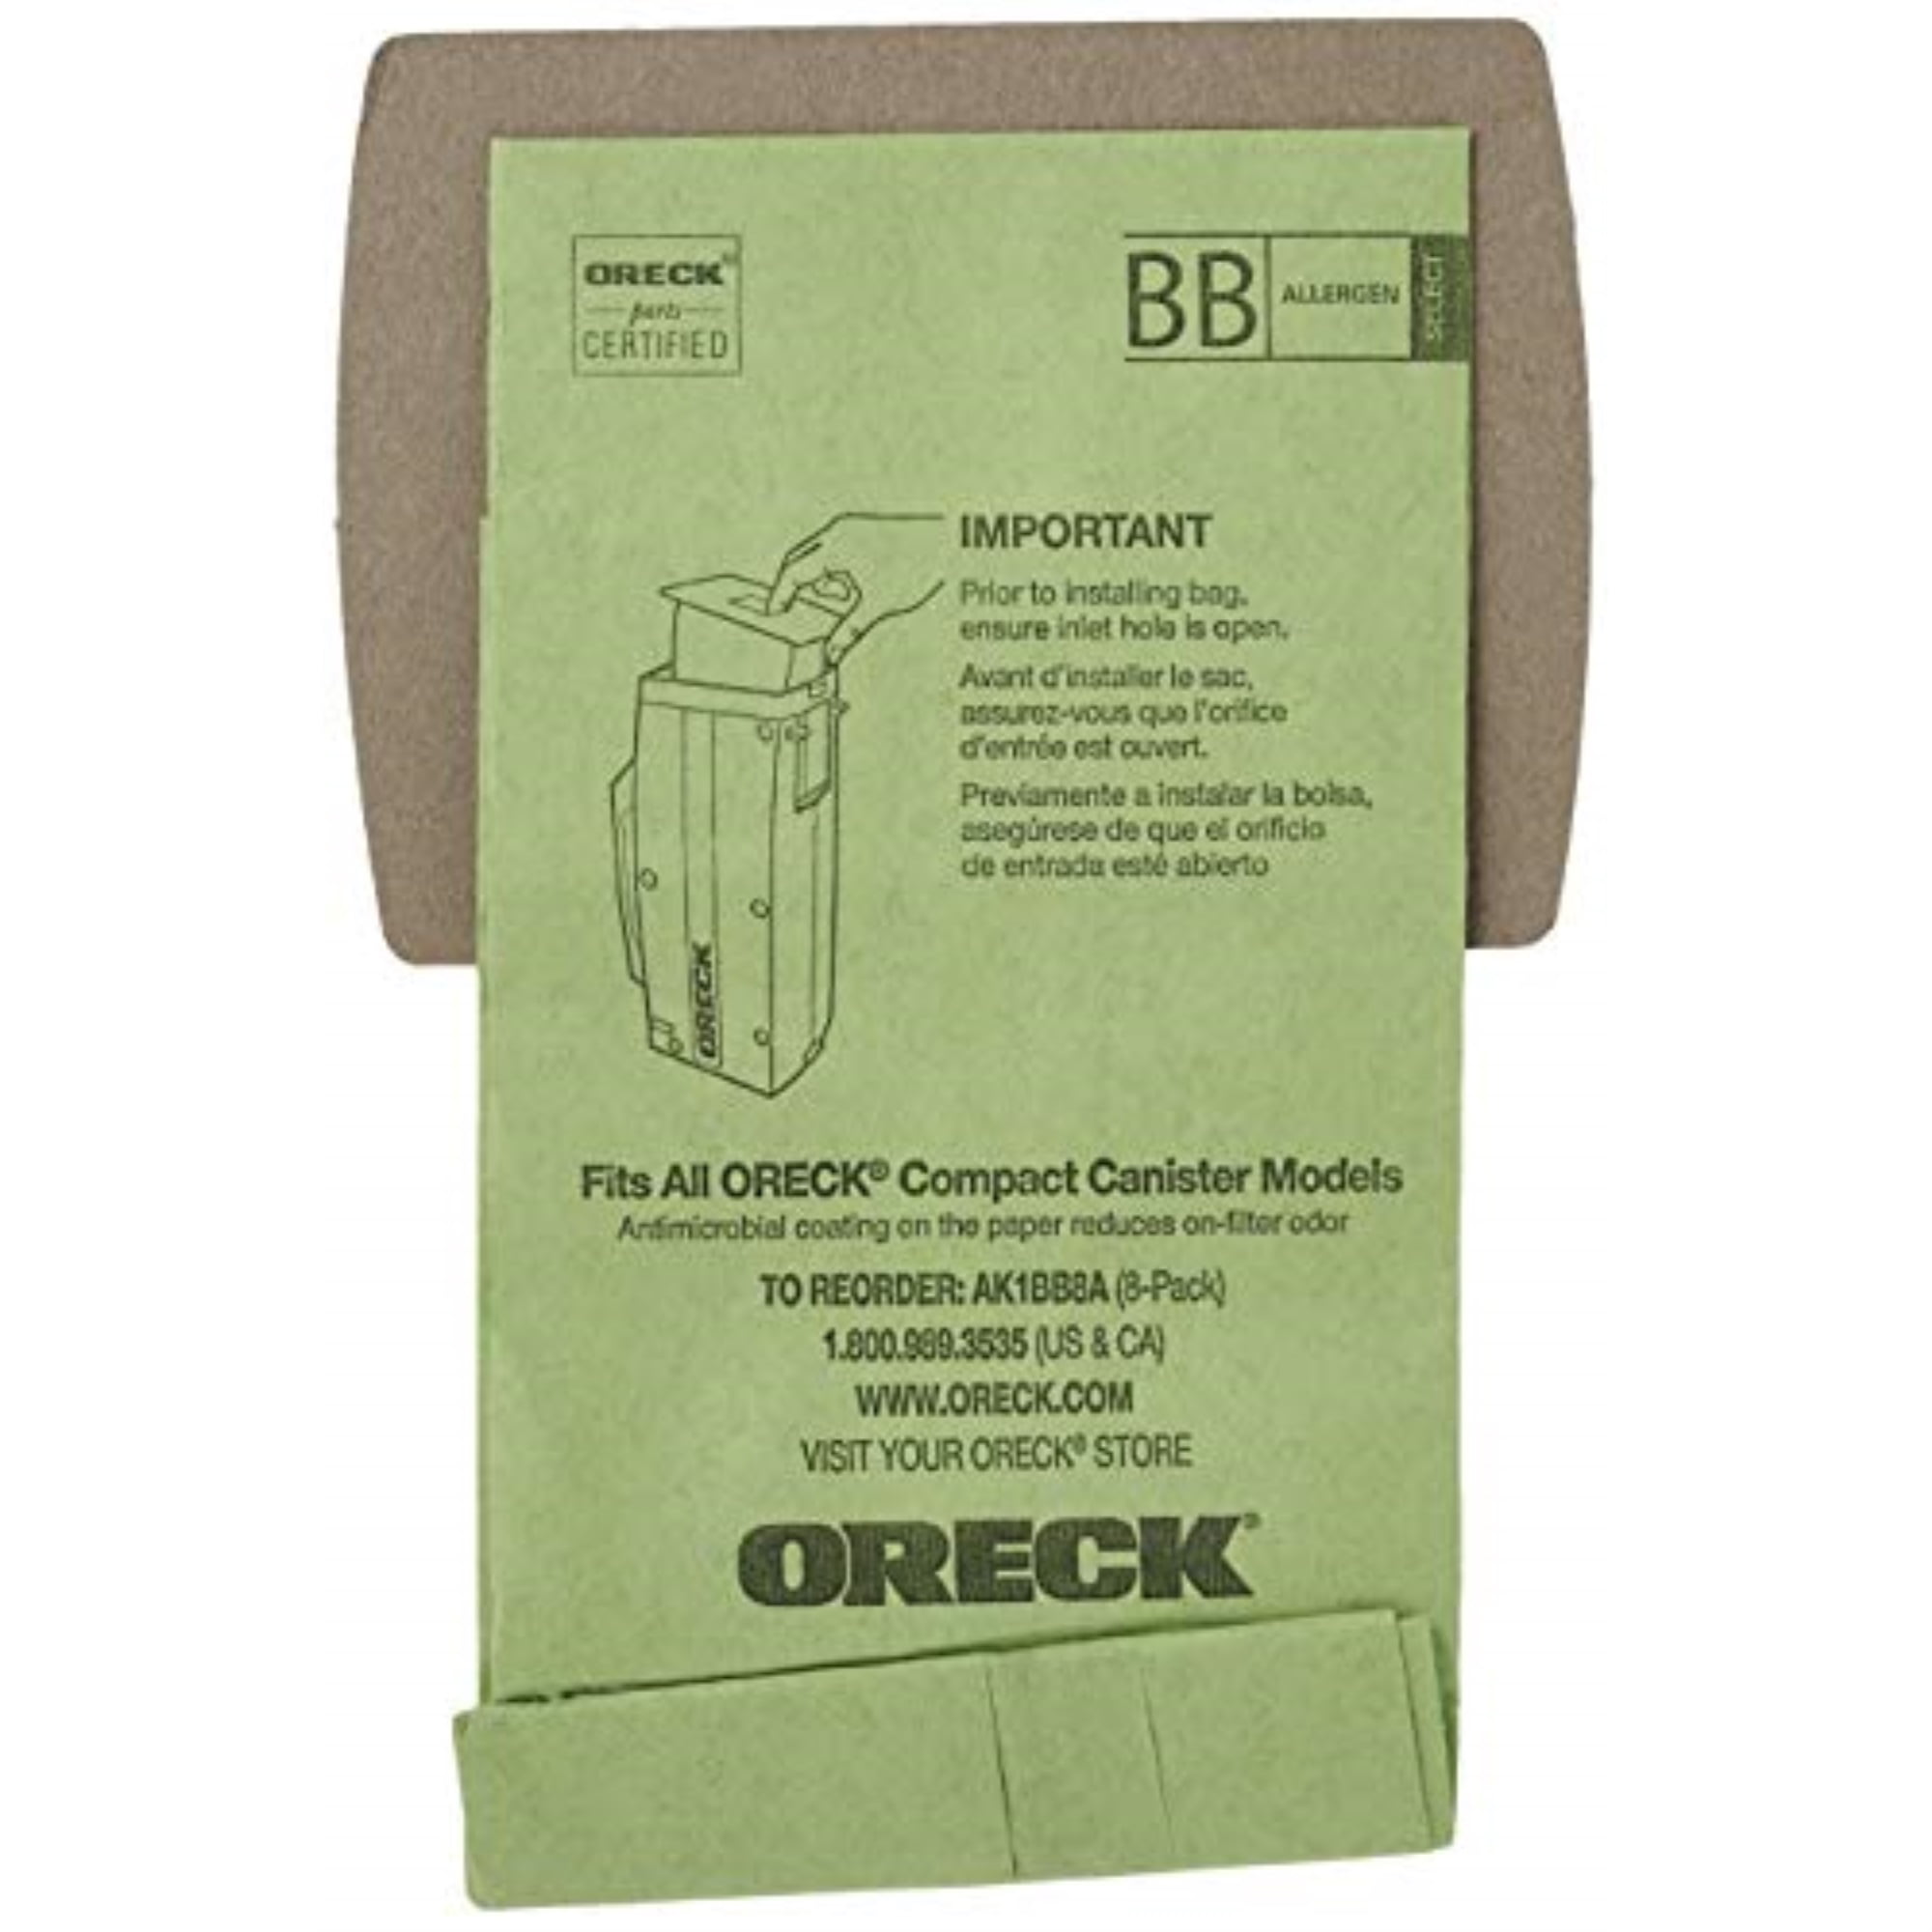 6 Oreck Buster B BB Housekeeper Allergy DVC Canister Portable Vacuum Bags 